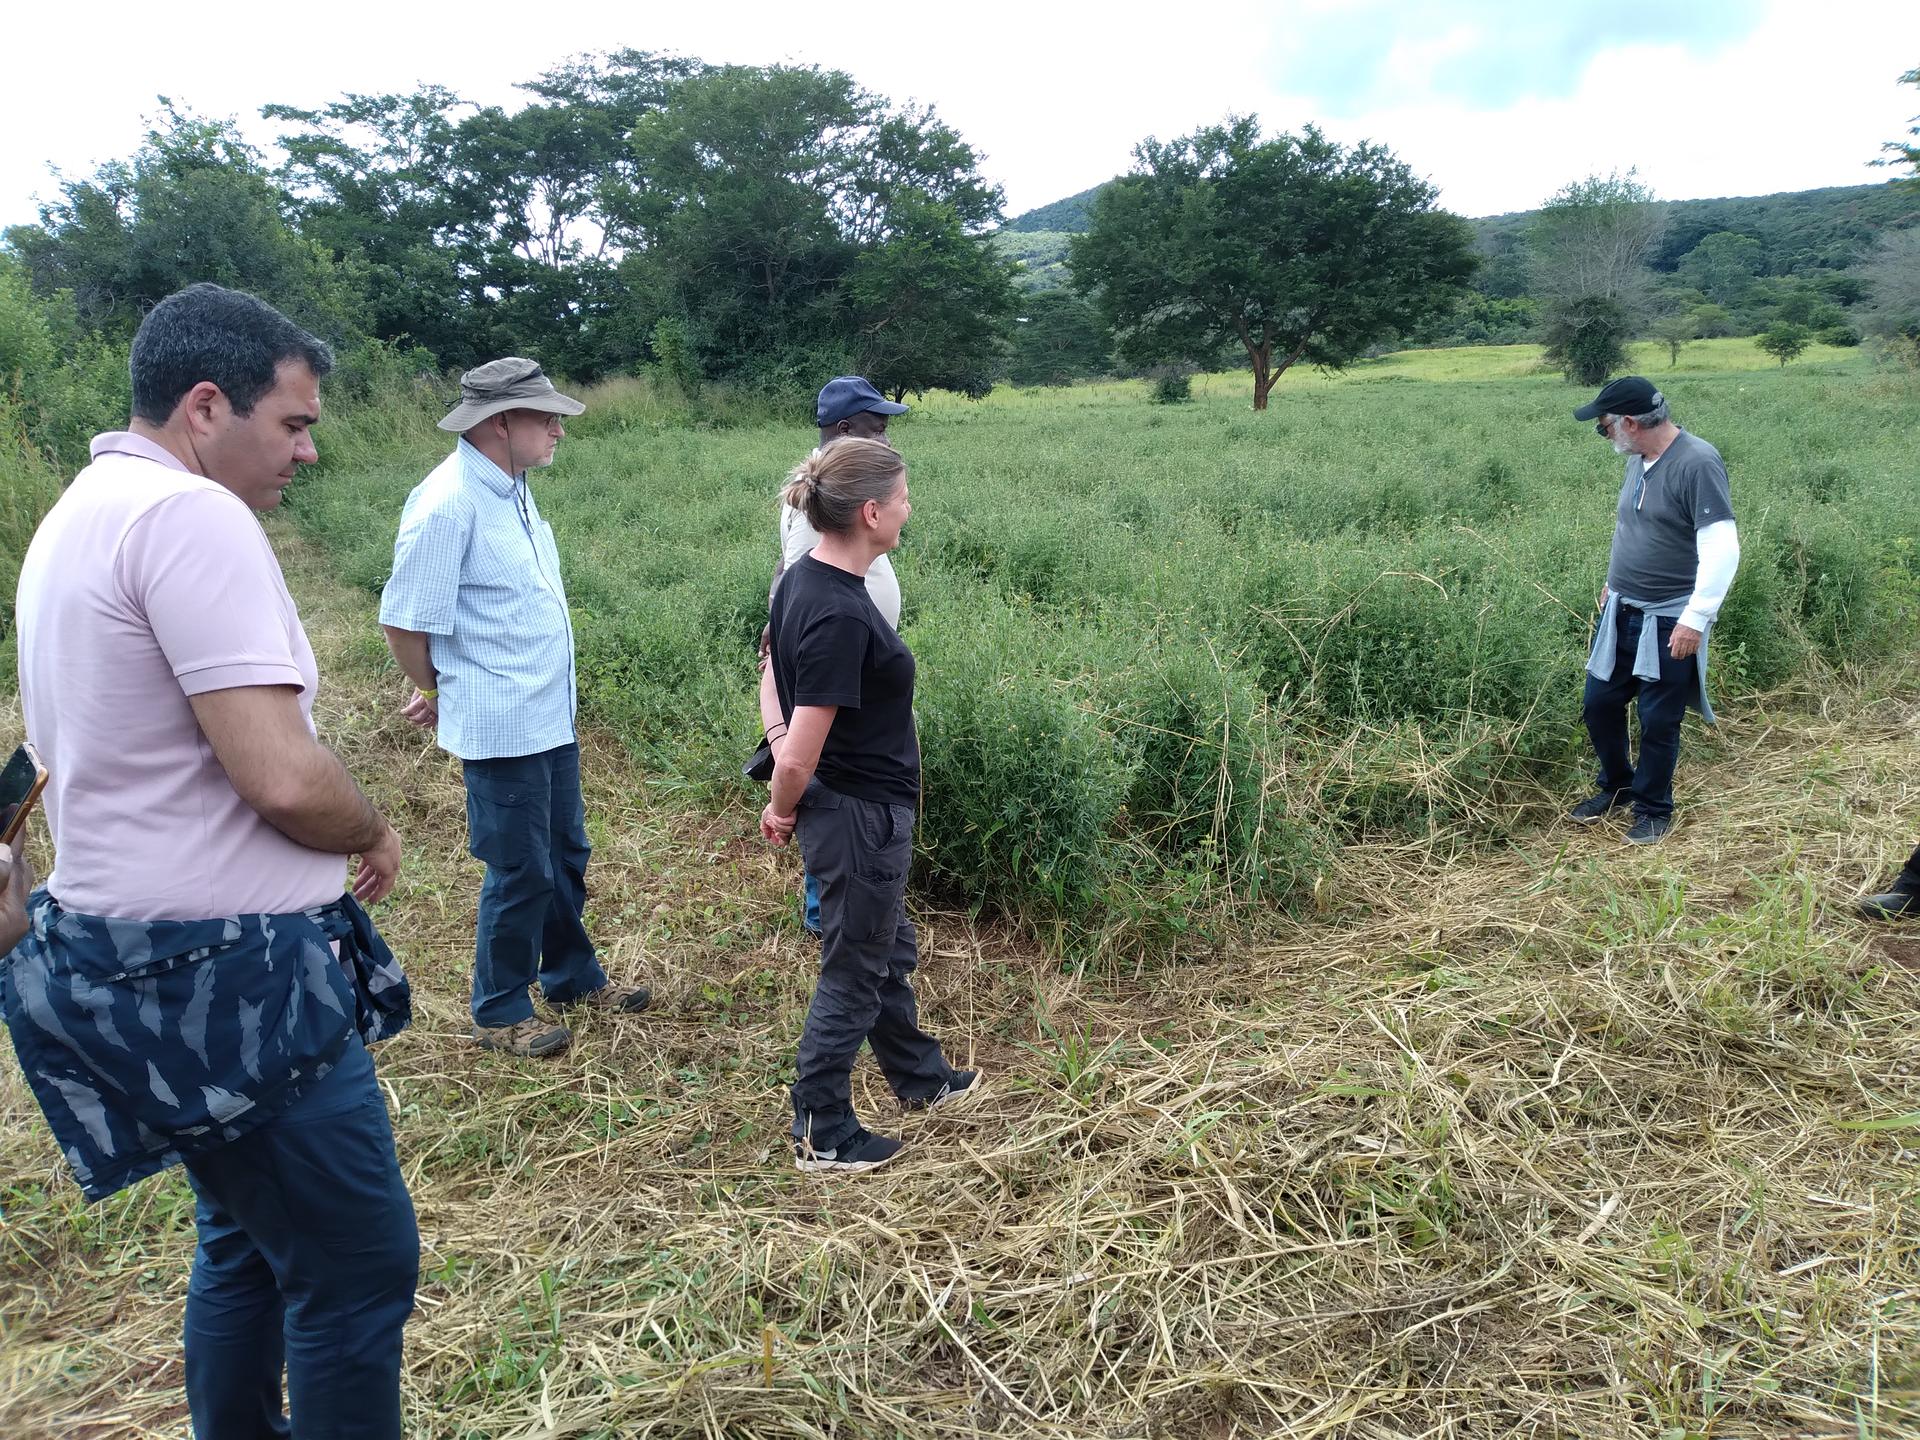 Alliance and Tropical Seeds co. teams observing a field of Stylosanthes guianensis in Kasama, Zambia